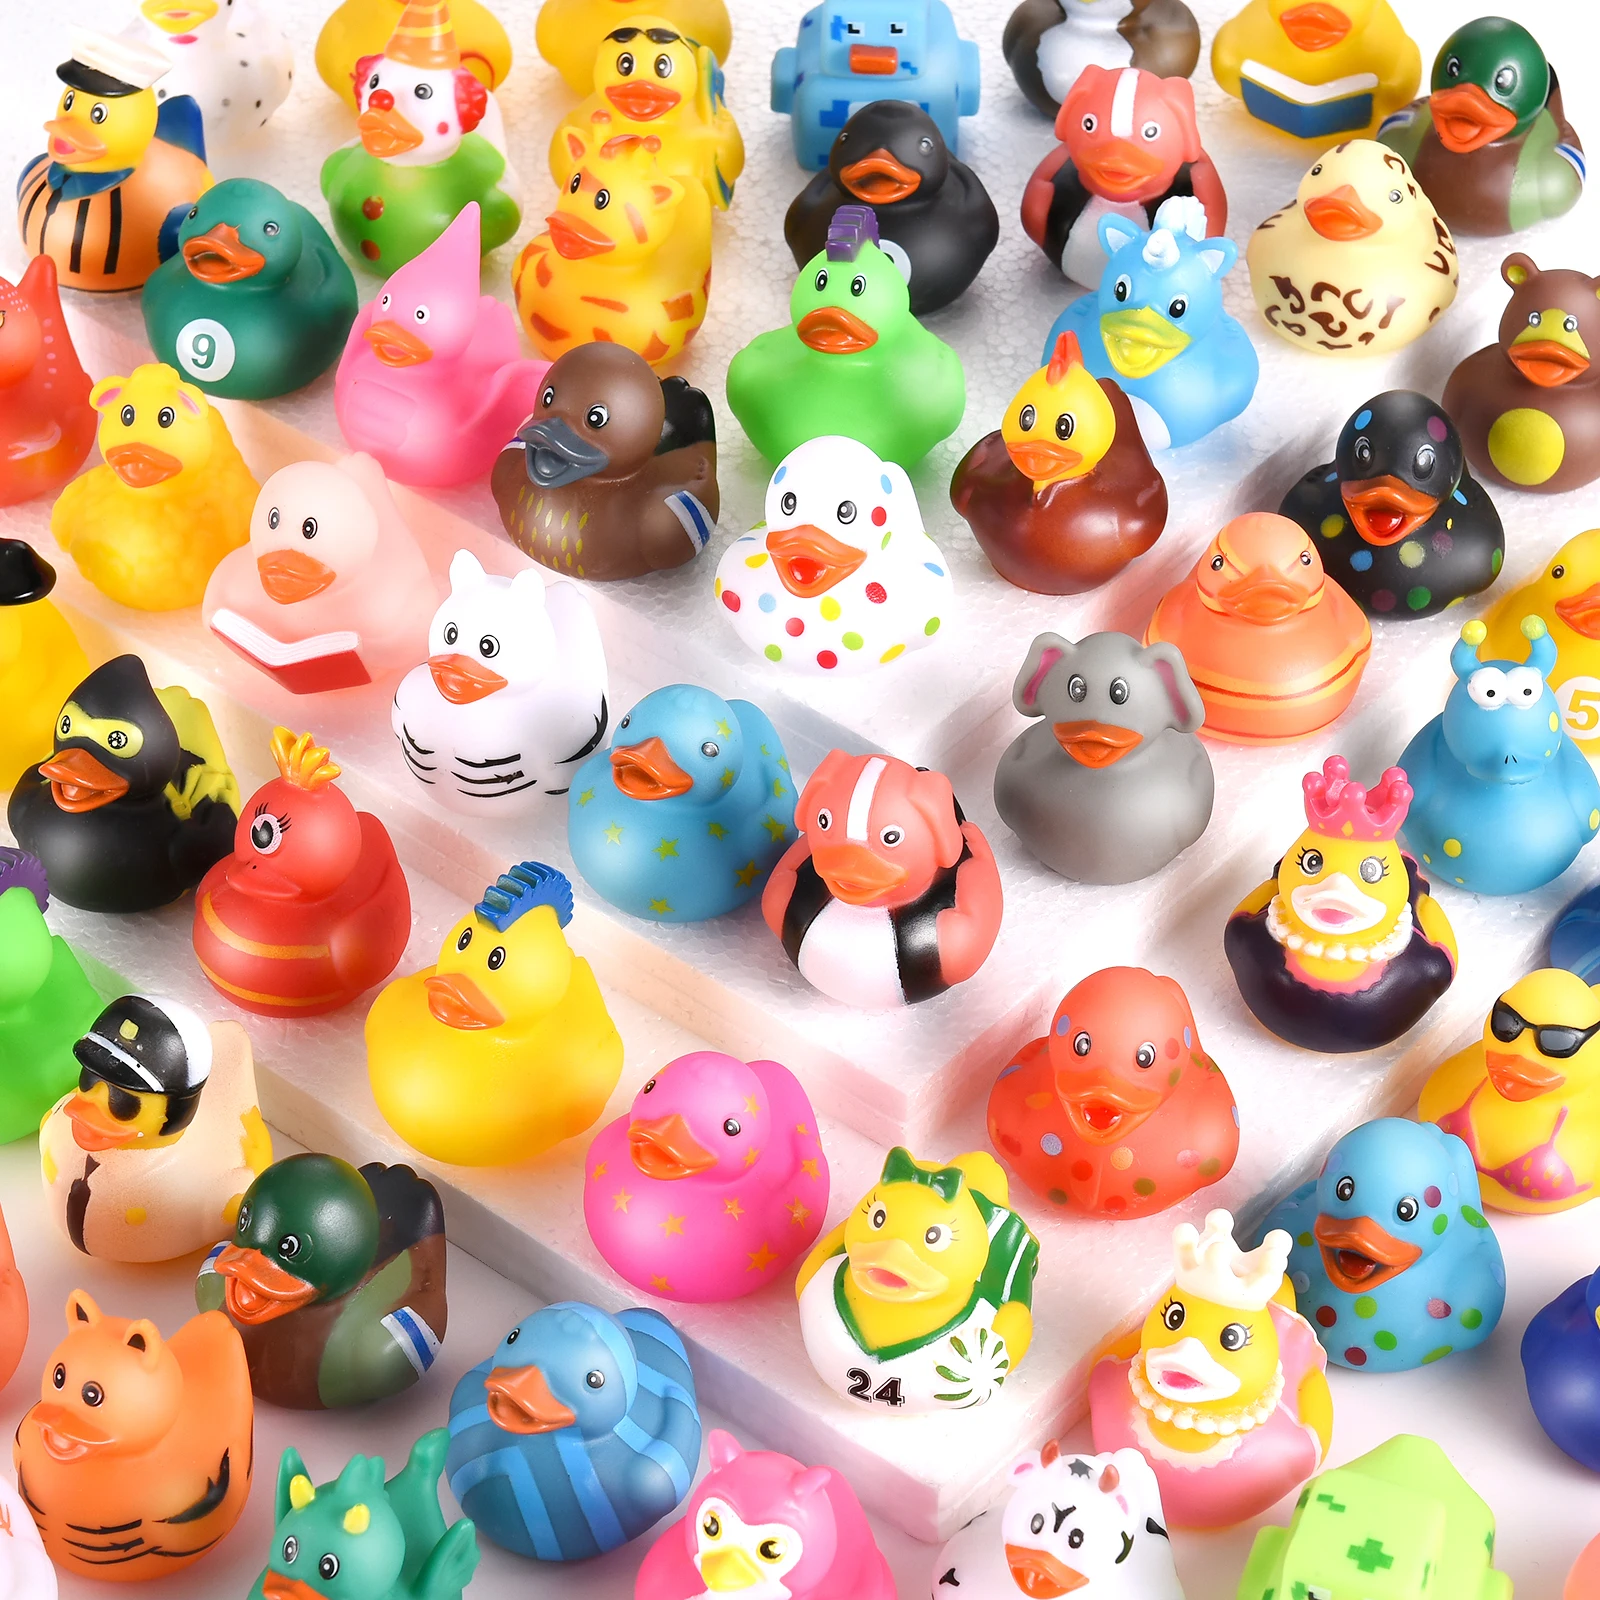 Rubber Duck 25 Pack Kids Tub Float Toy Cake Decor Birthday Gift School Classroom Prize Trick Or Treat Toy Or Car Decoration